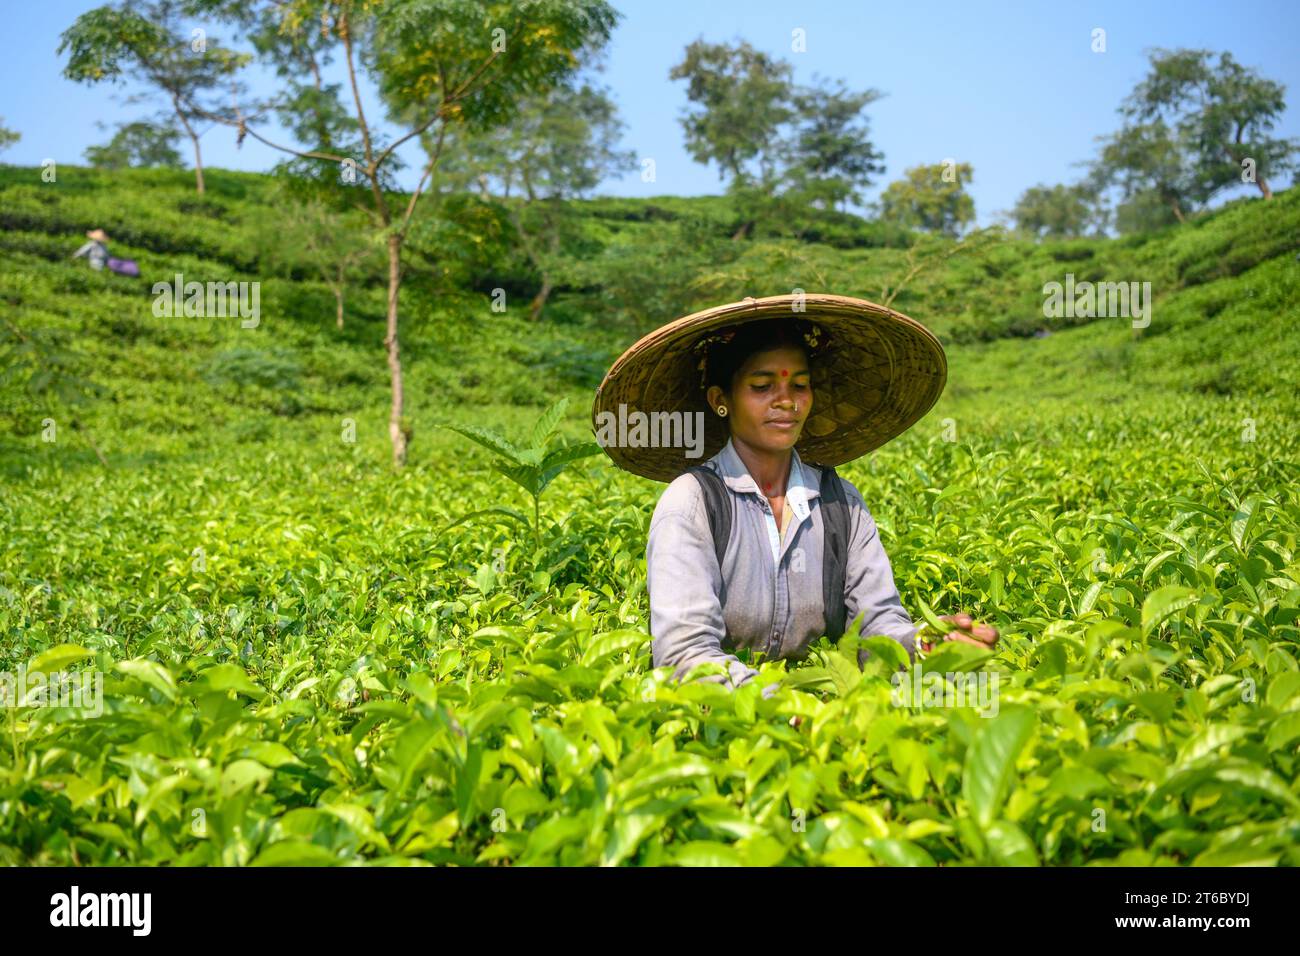 A worker poses for a photo at a Tea Garden in Moulvibazar. Tea Plucking is a specialized skill. Two leaves and a bud need to be plucked in order to get the best taste and in order to make profits. The calculation of daily wage is 170tk (1.60$) for plucking at least 22-23 kg leaves per day for a worker. The area of Sylhet has over 150 gardens including three of the largest tea gardens in the world both in area. Nearly 300,000 workers are employed on the tea estates of which over 75% are women. Working conditions and wages are considered to be very low. Stock Photo